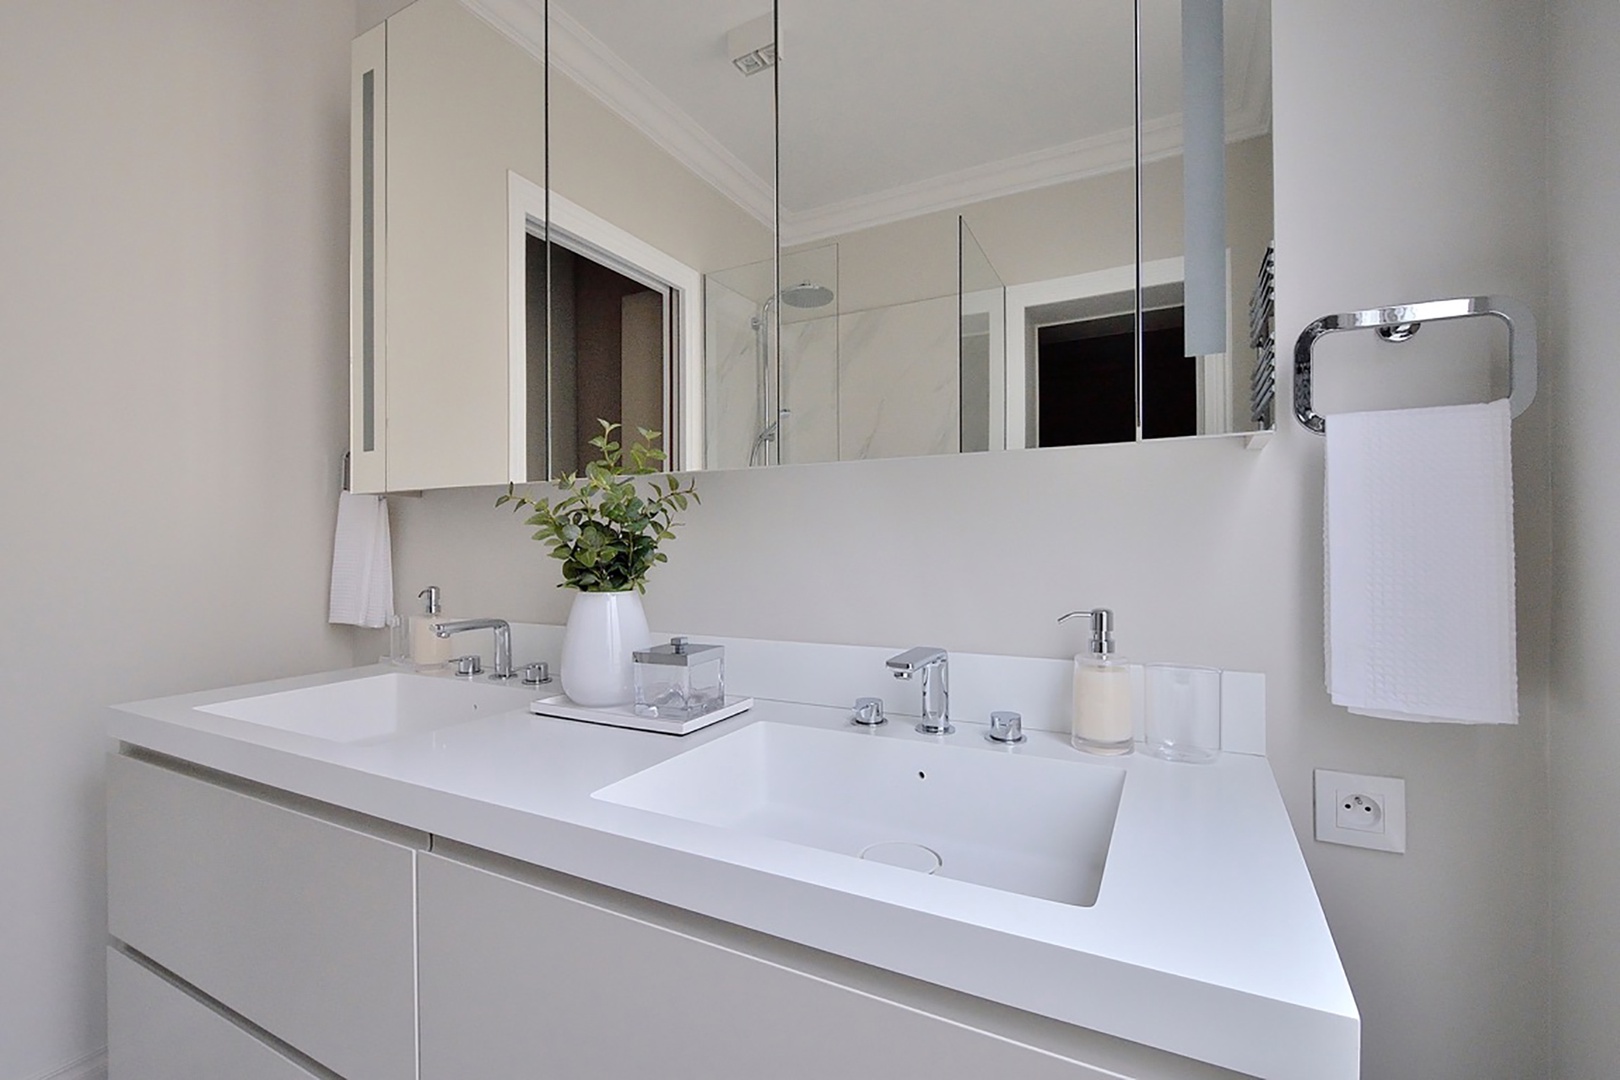 Every bathroom is beautifully finished in this apartment.